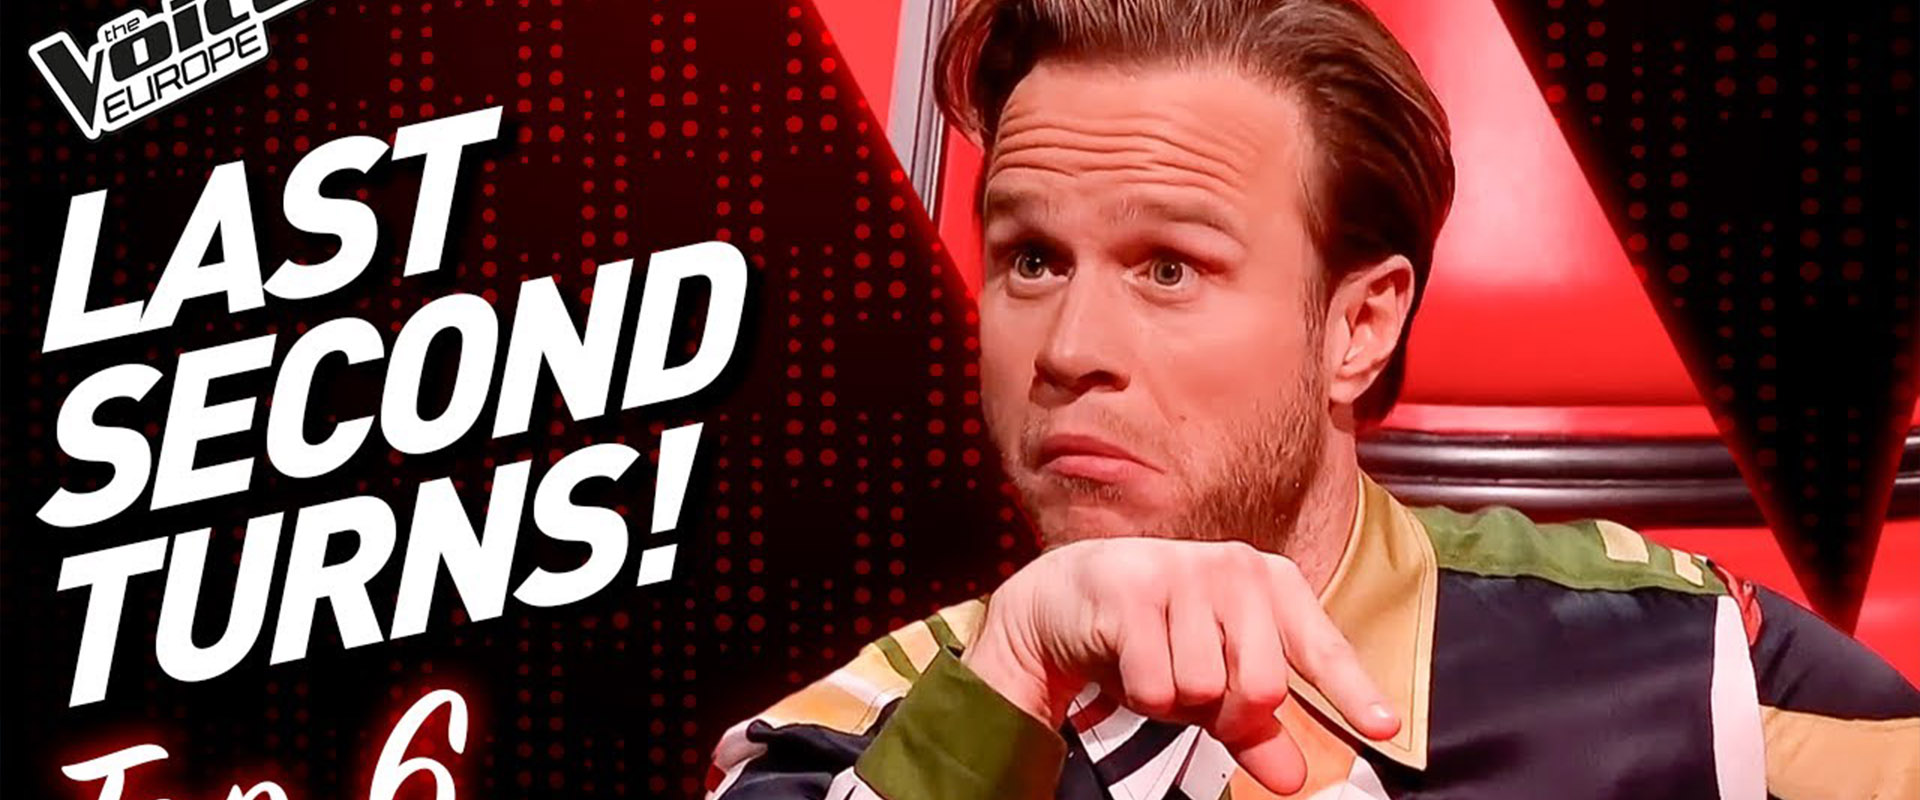 Fantastic LAST SECOND Chair Turns on The Voice! | TOP 6